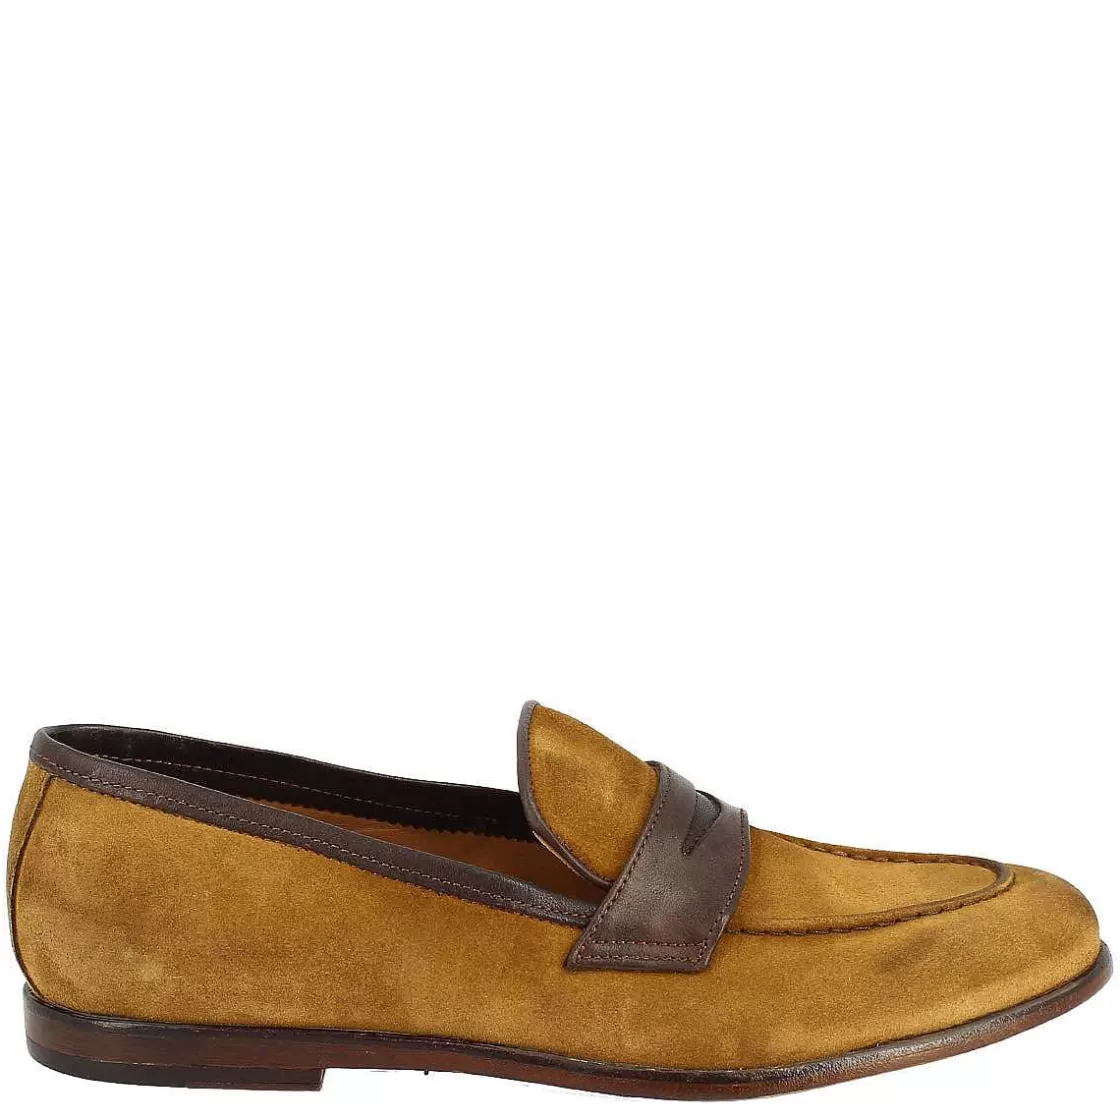 Leonardo Classic Men'S Slip-On Loafers In Brown Suede And Leather Handmade Outlet